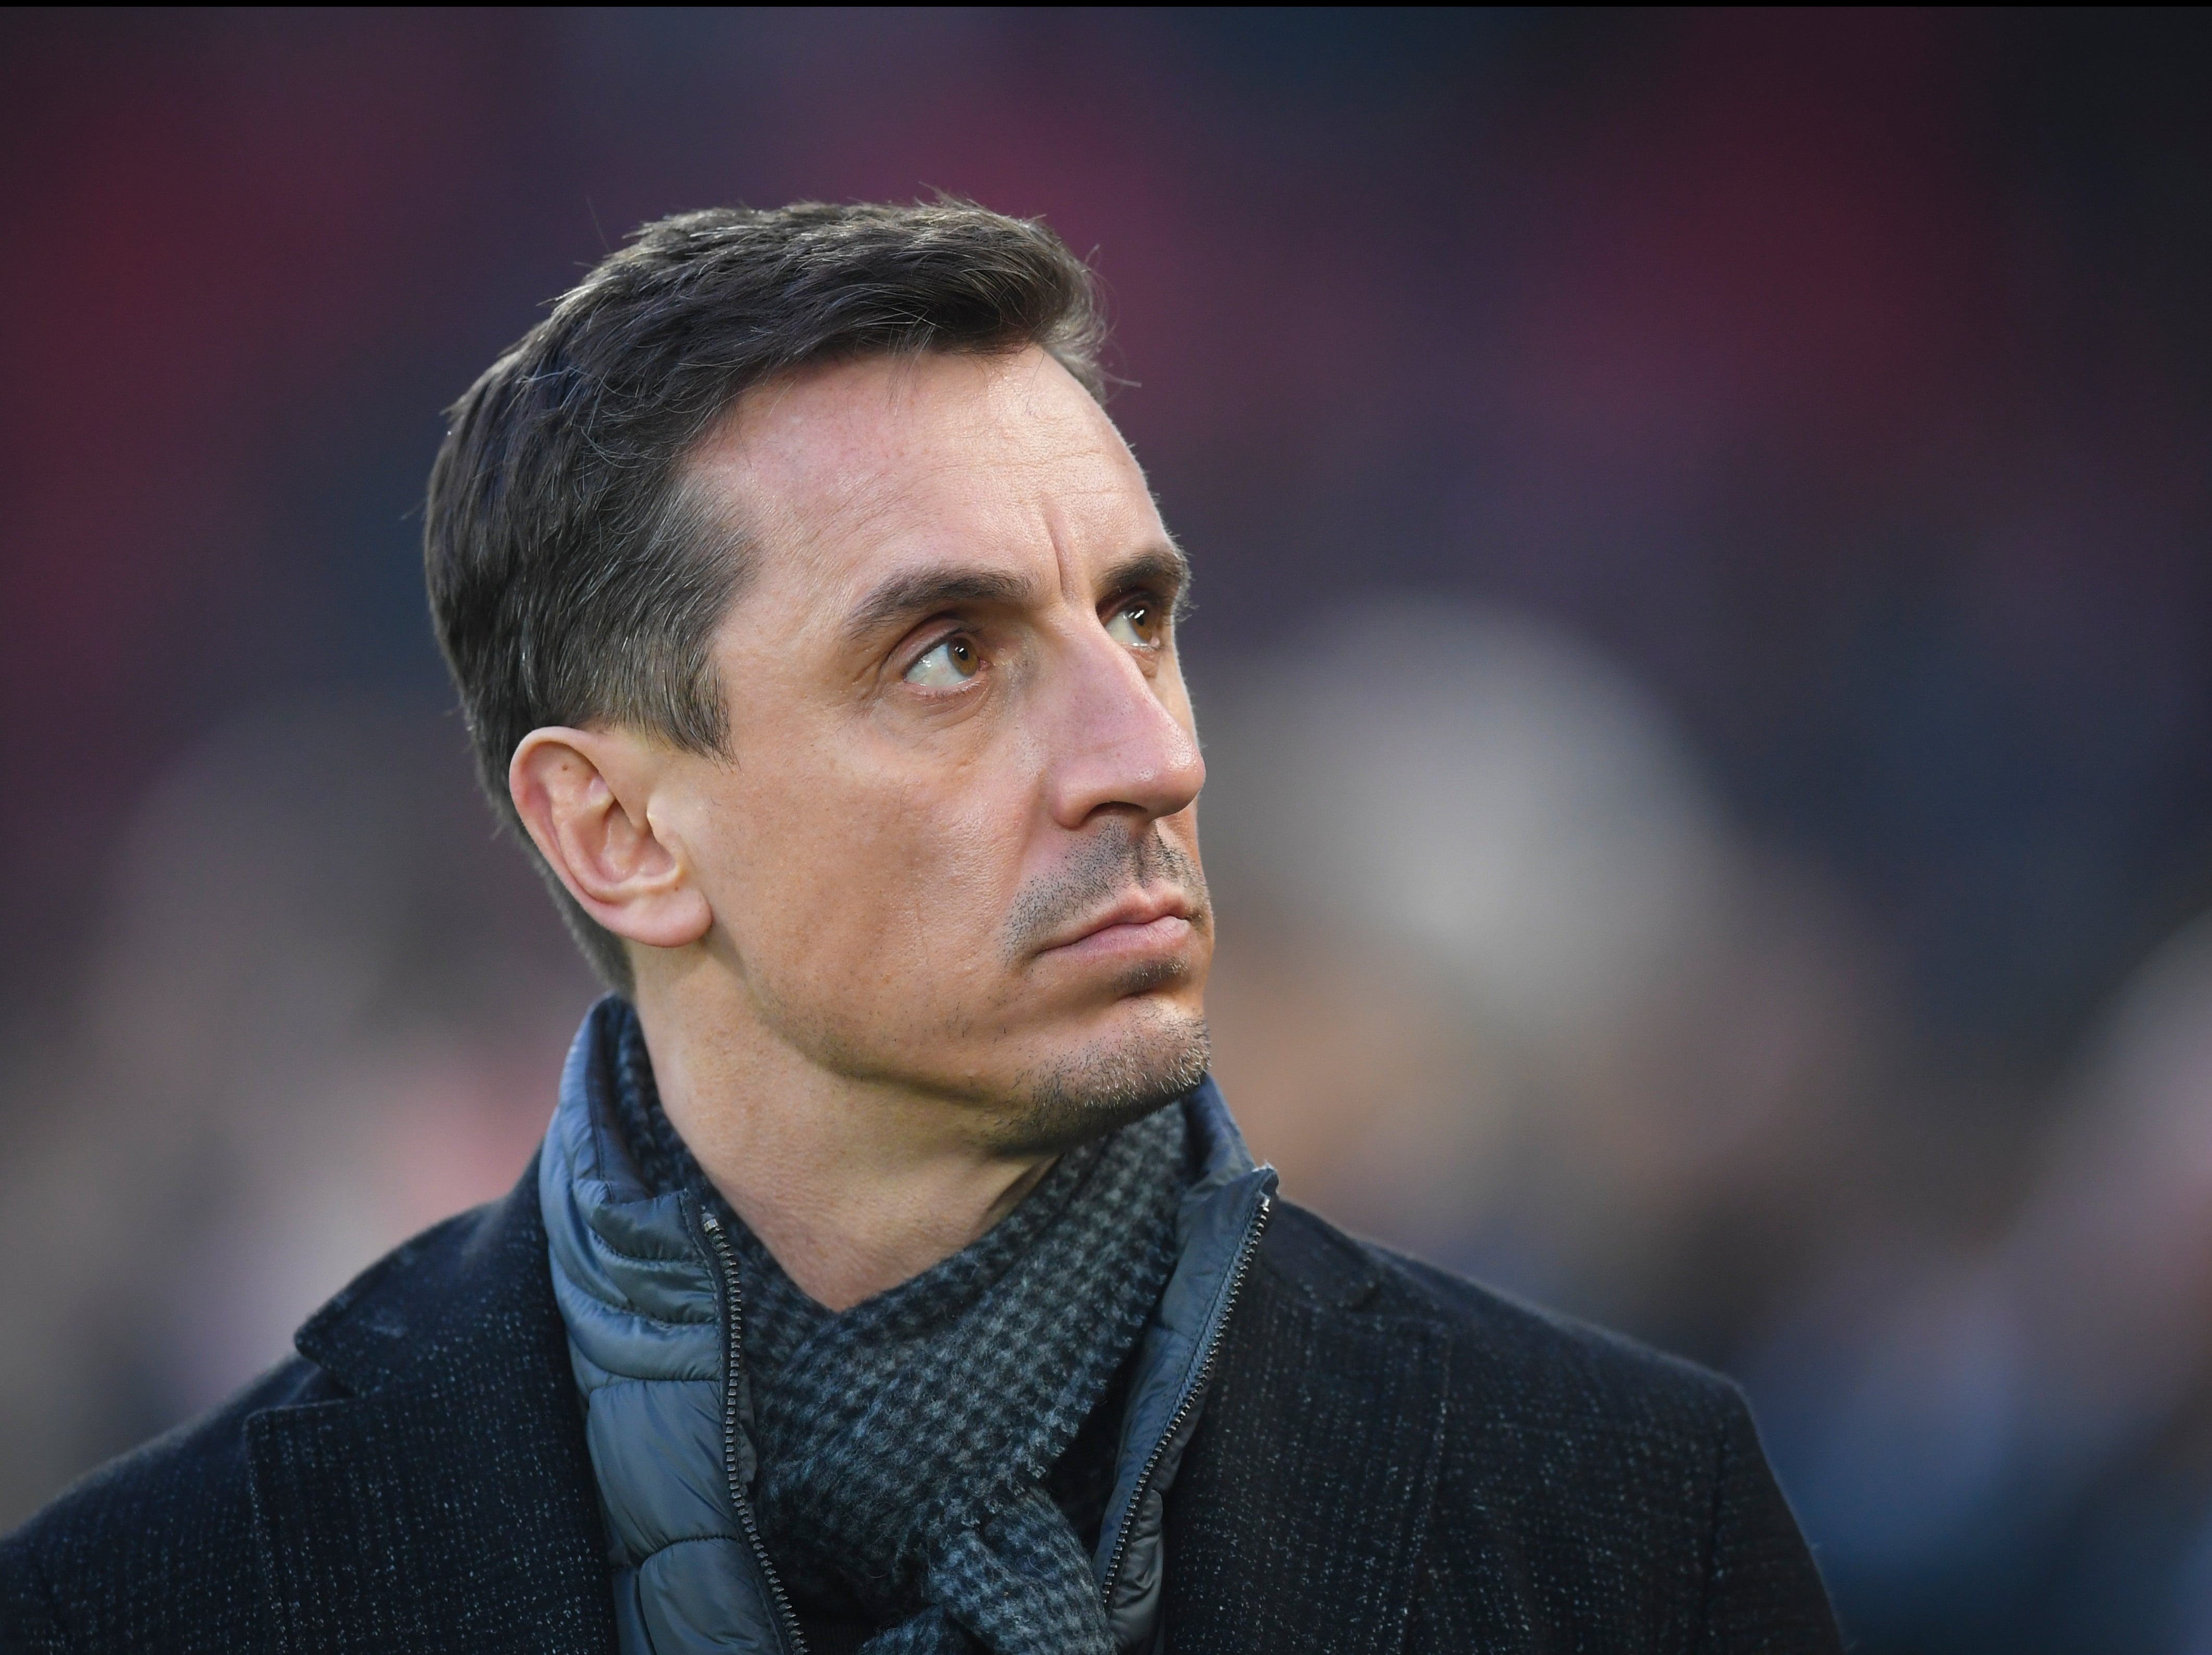 Gary Neville is involved in the proposal of a radical new manifesto regarding a reform of English football governance